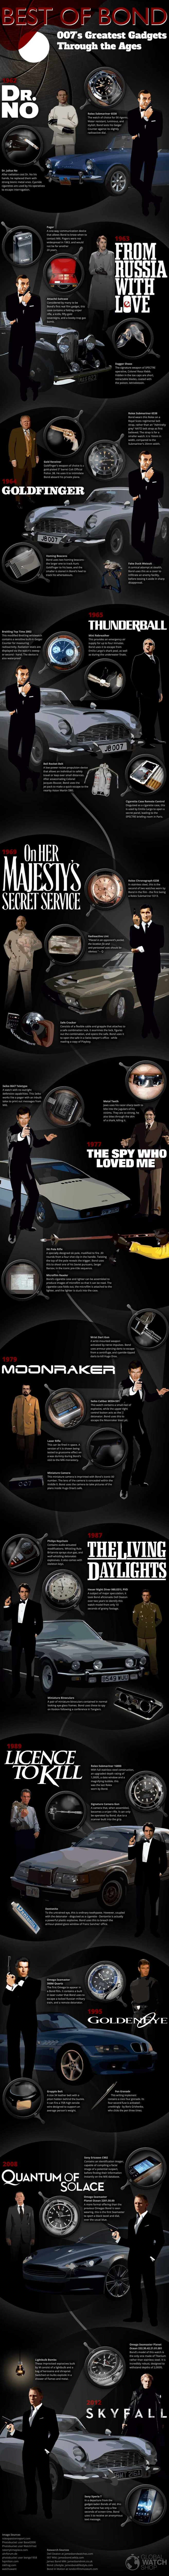 Best of Bond: 007’s Greatest Gadgets Through the Ages [Infographic]